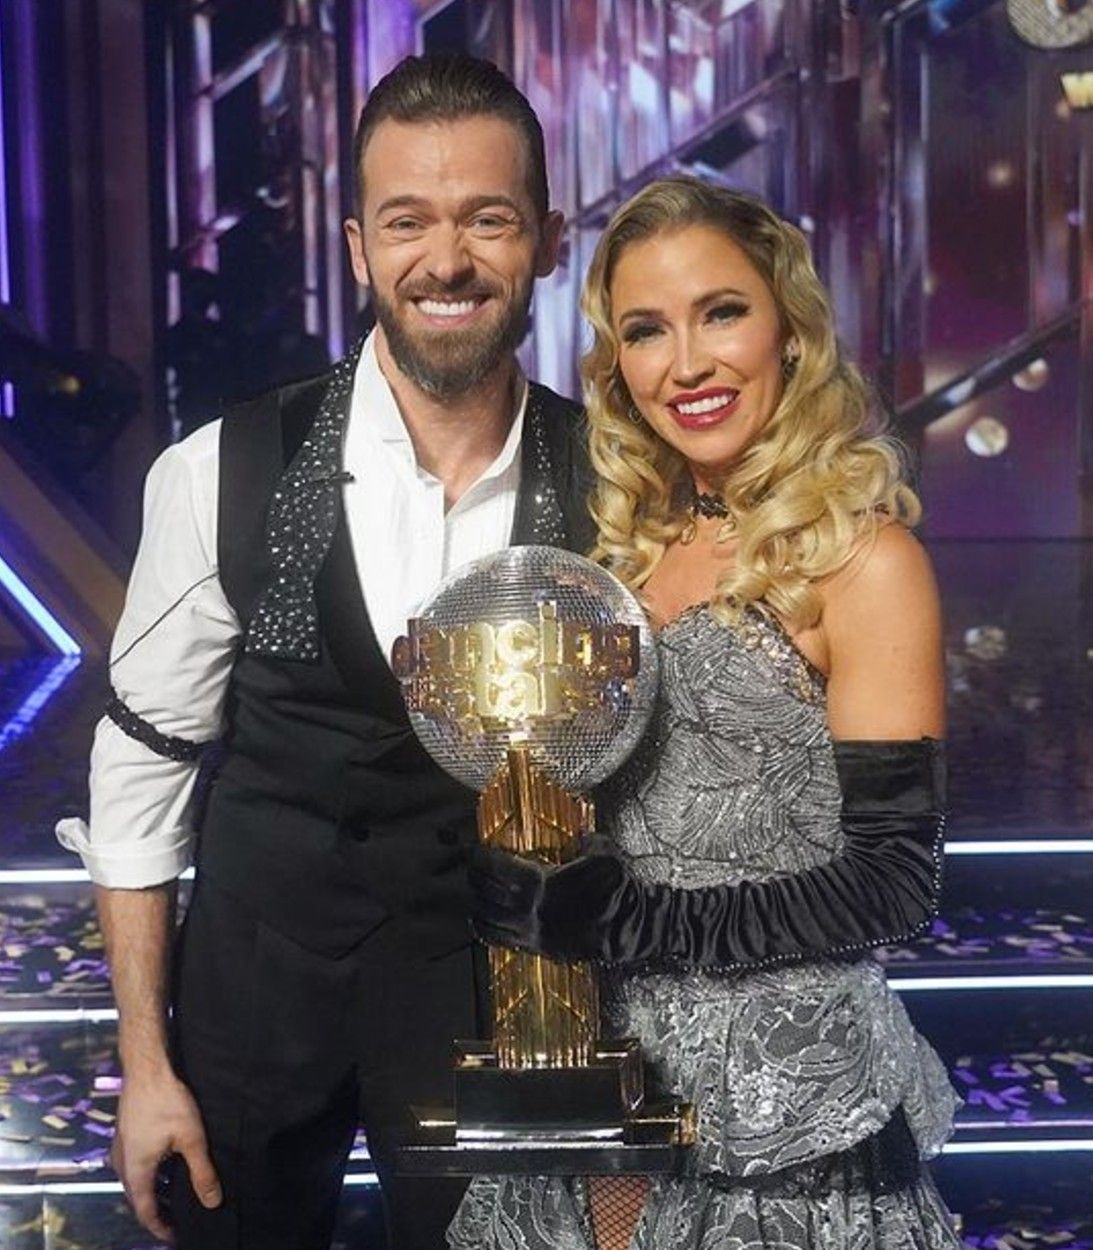 Kaitlyn Bristowe and Artem Chigvintsev on the Dancing With The Stars 2020 season 29 finale vertical